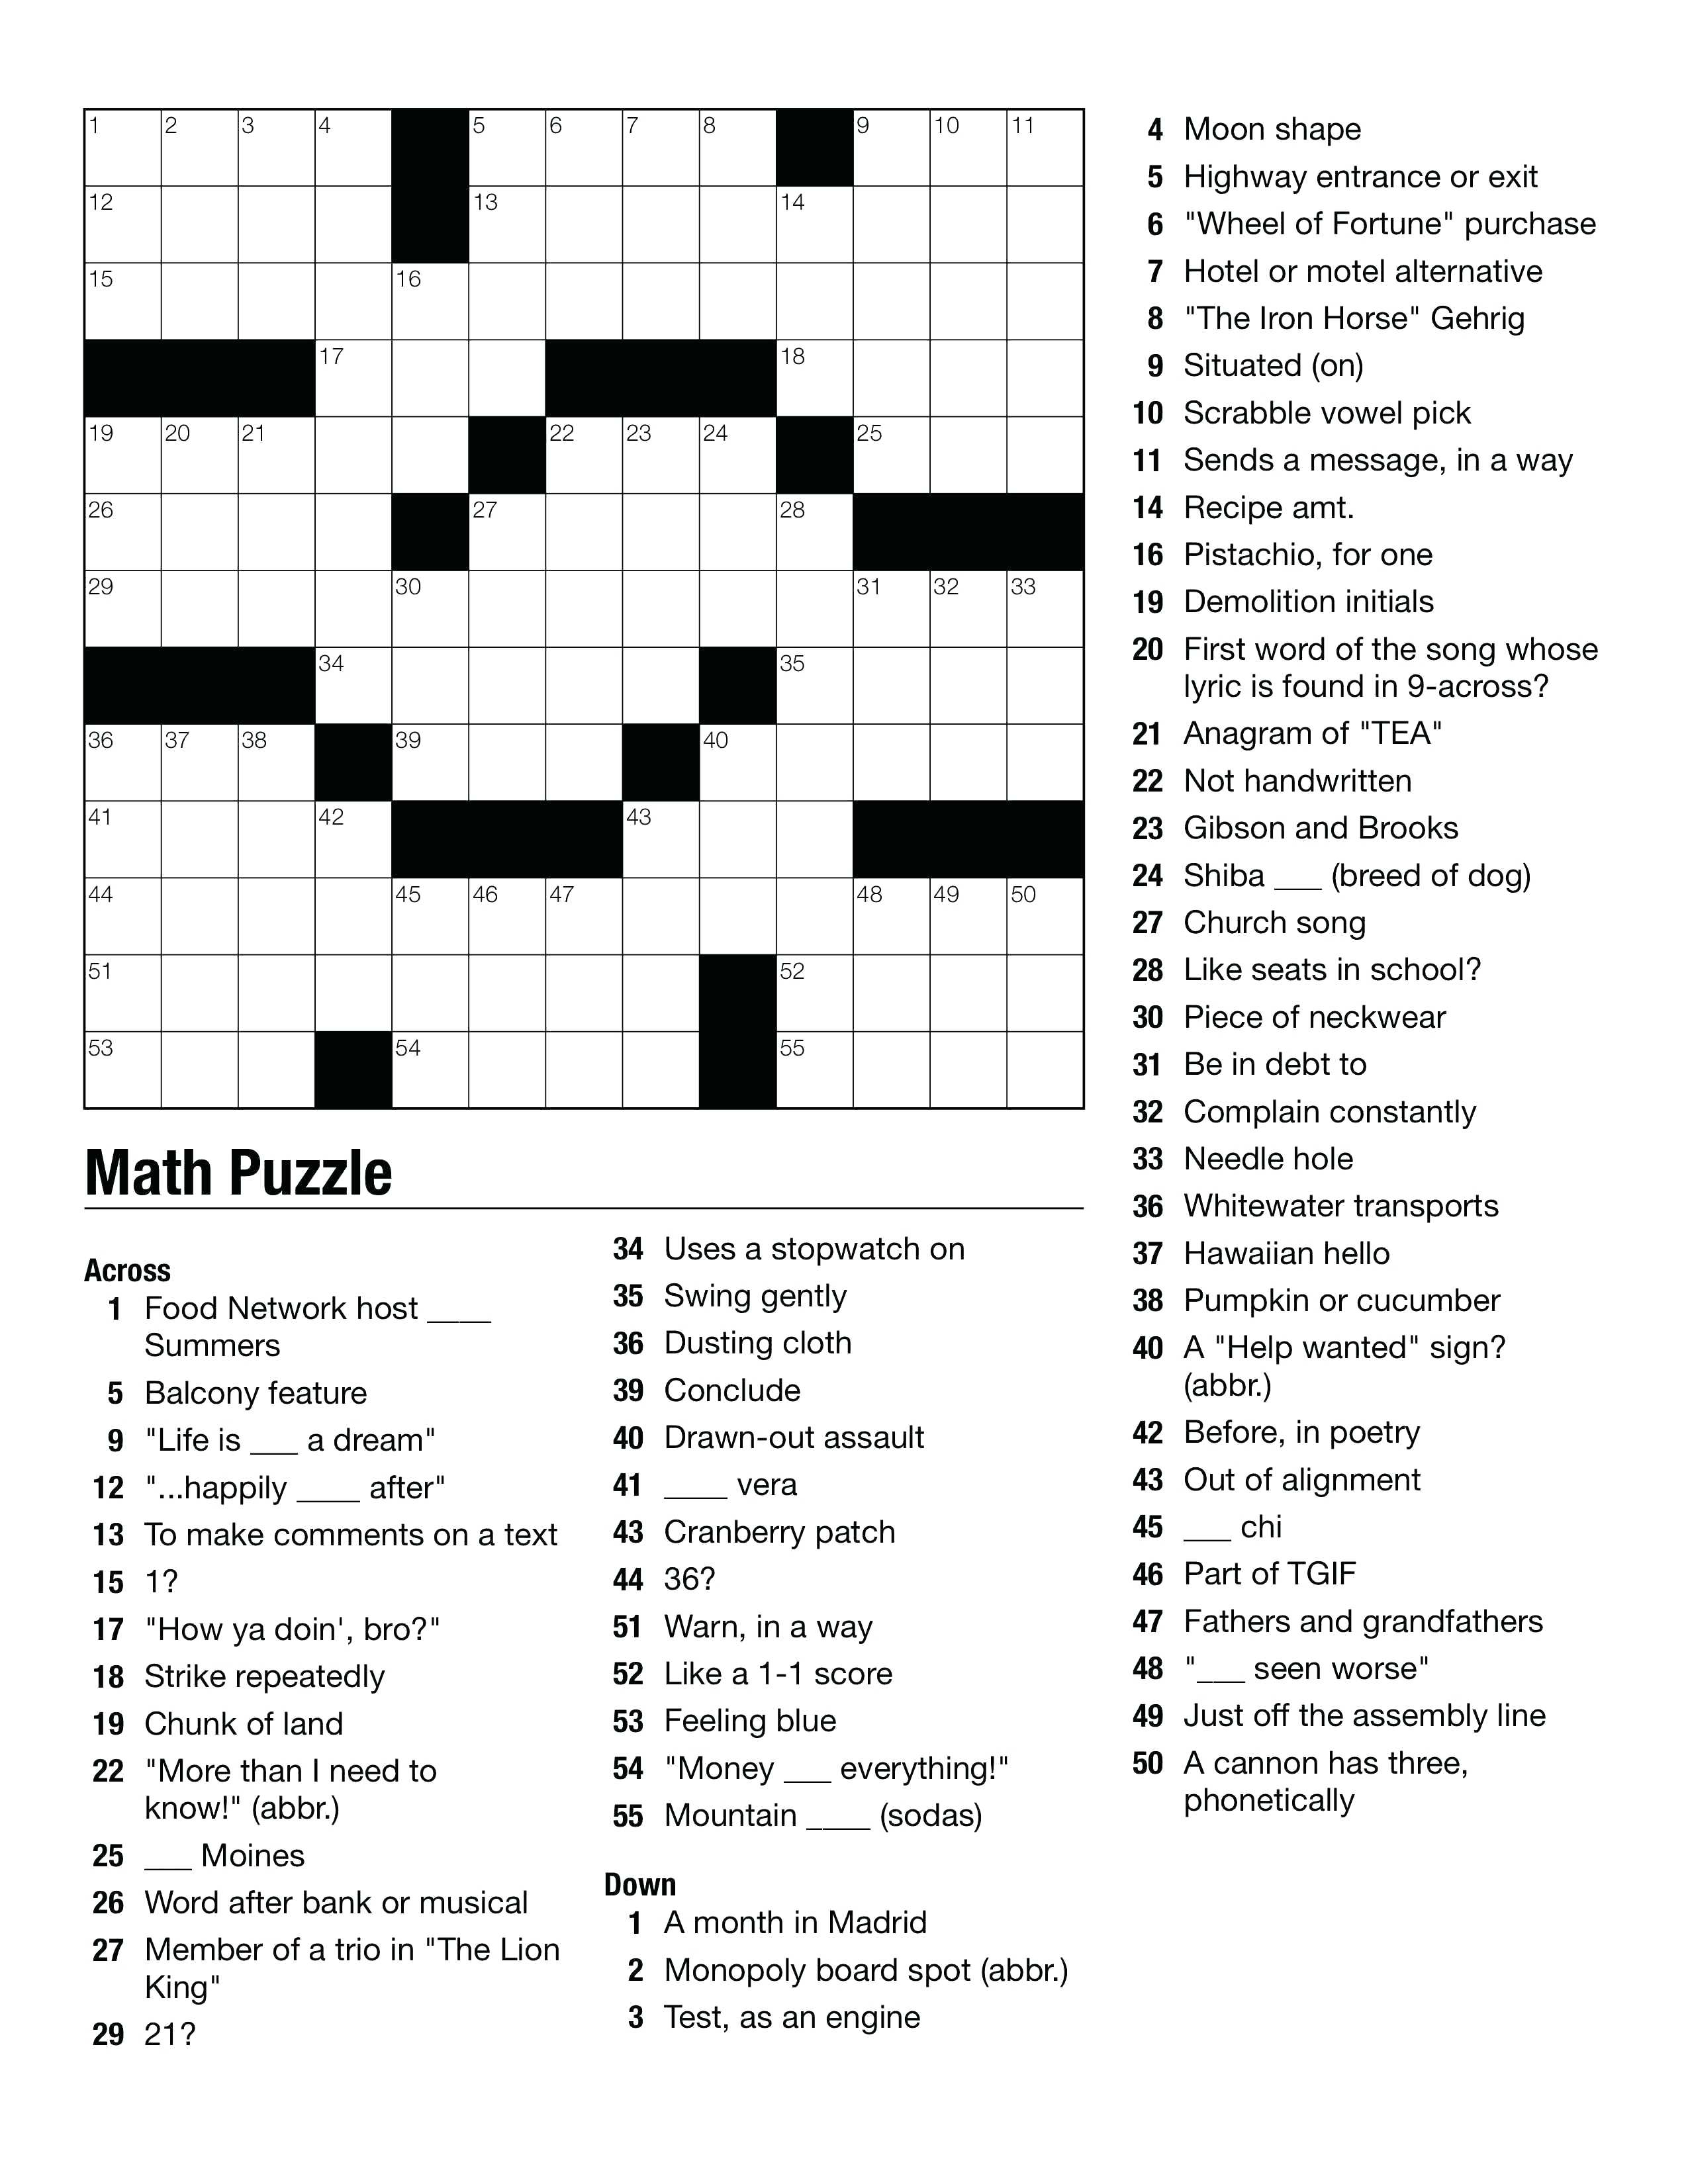 Geometry Puzzles Math Geometry Images Teaching Ideas On Crossword - Math Crossword Puzzles Printable